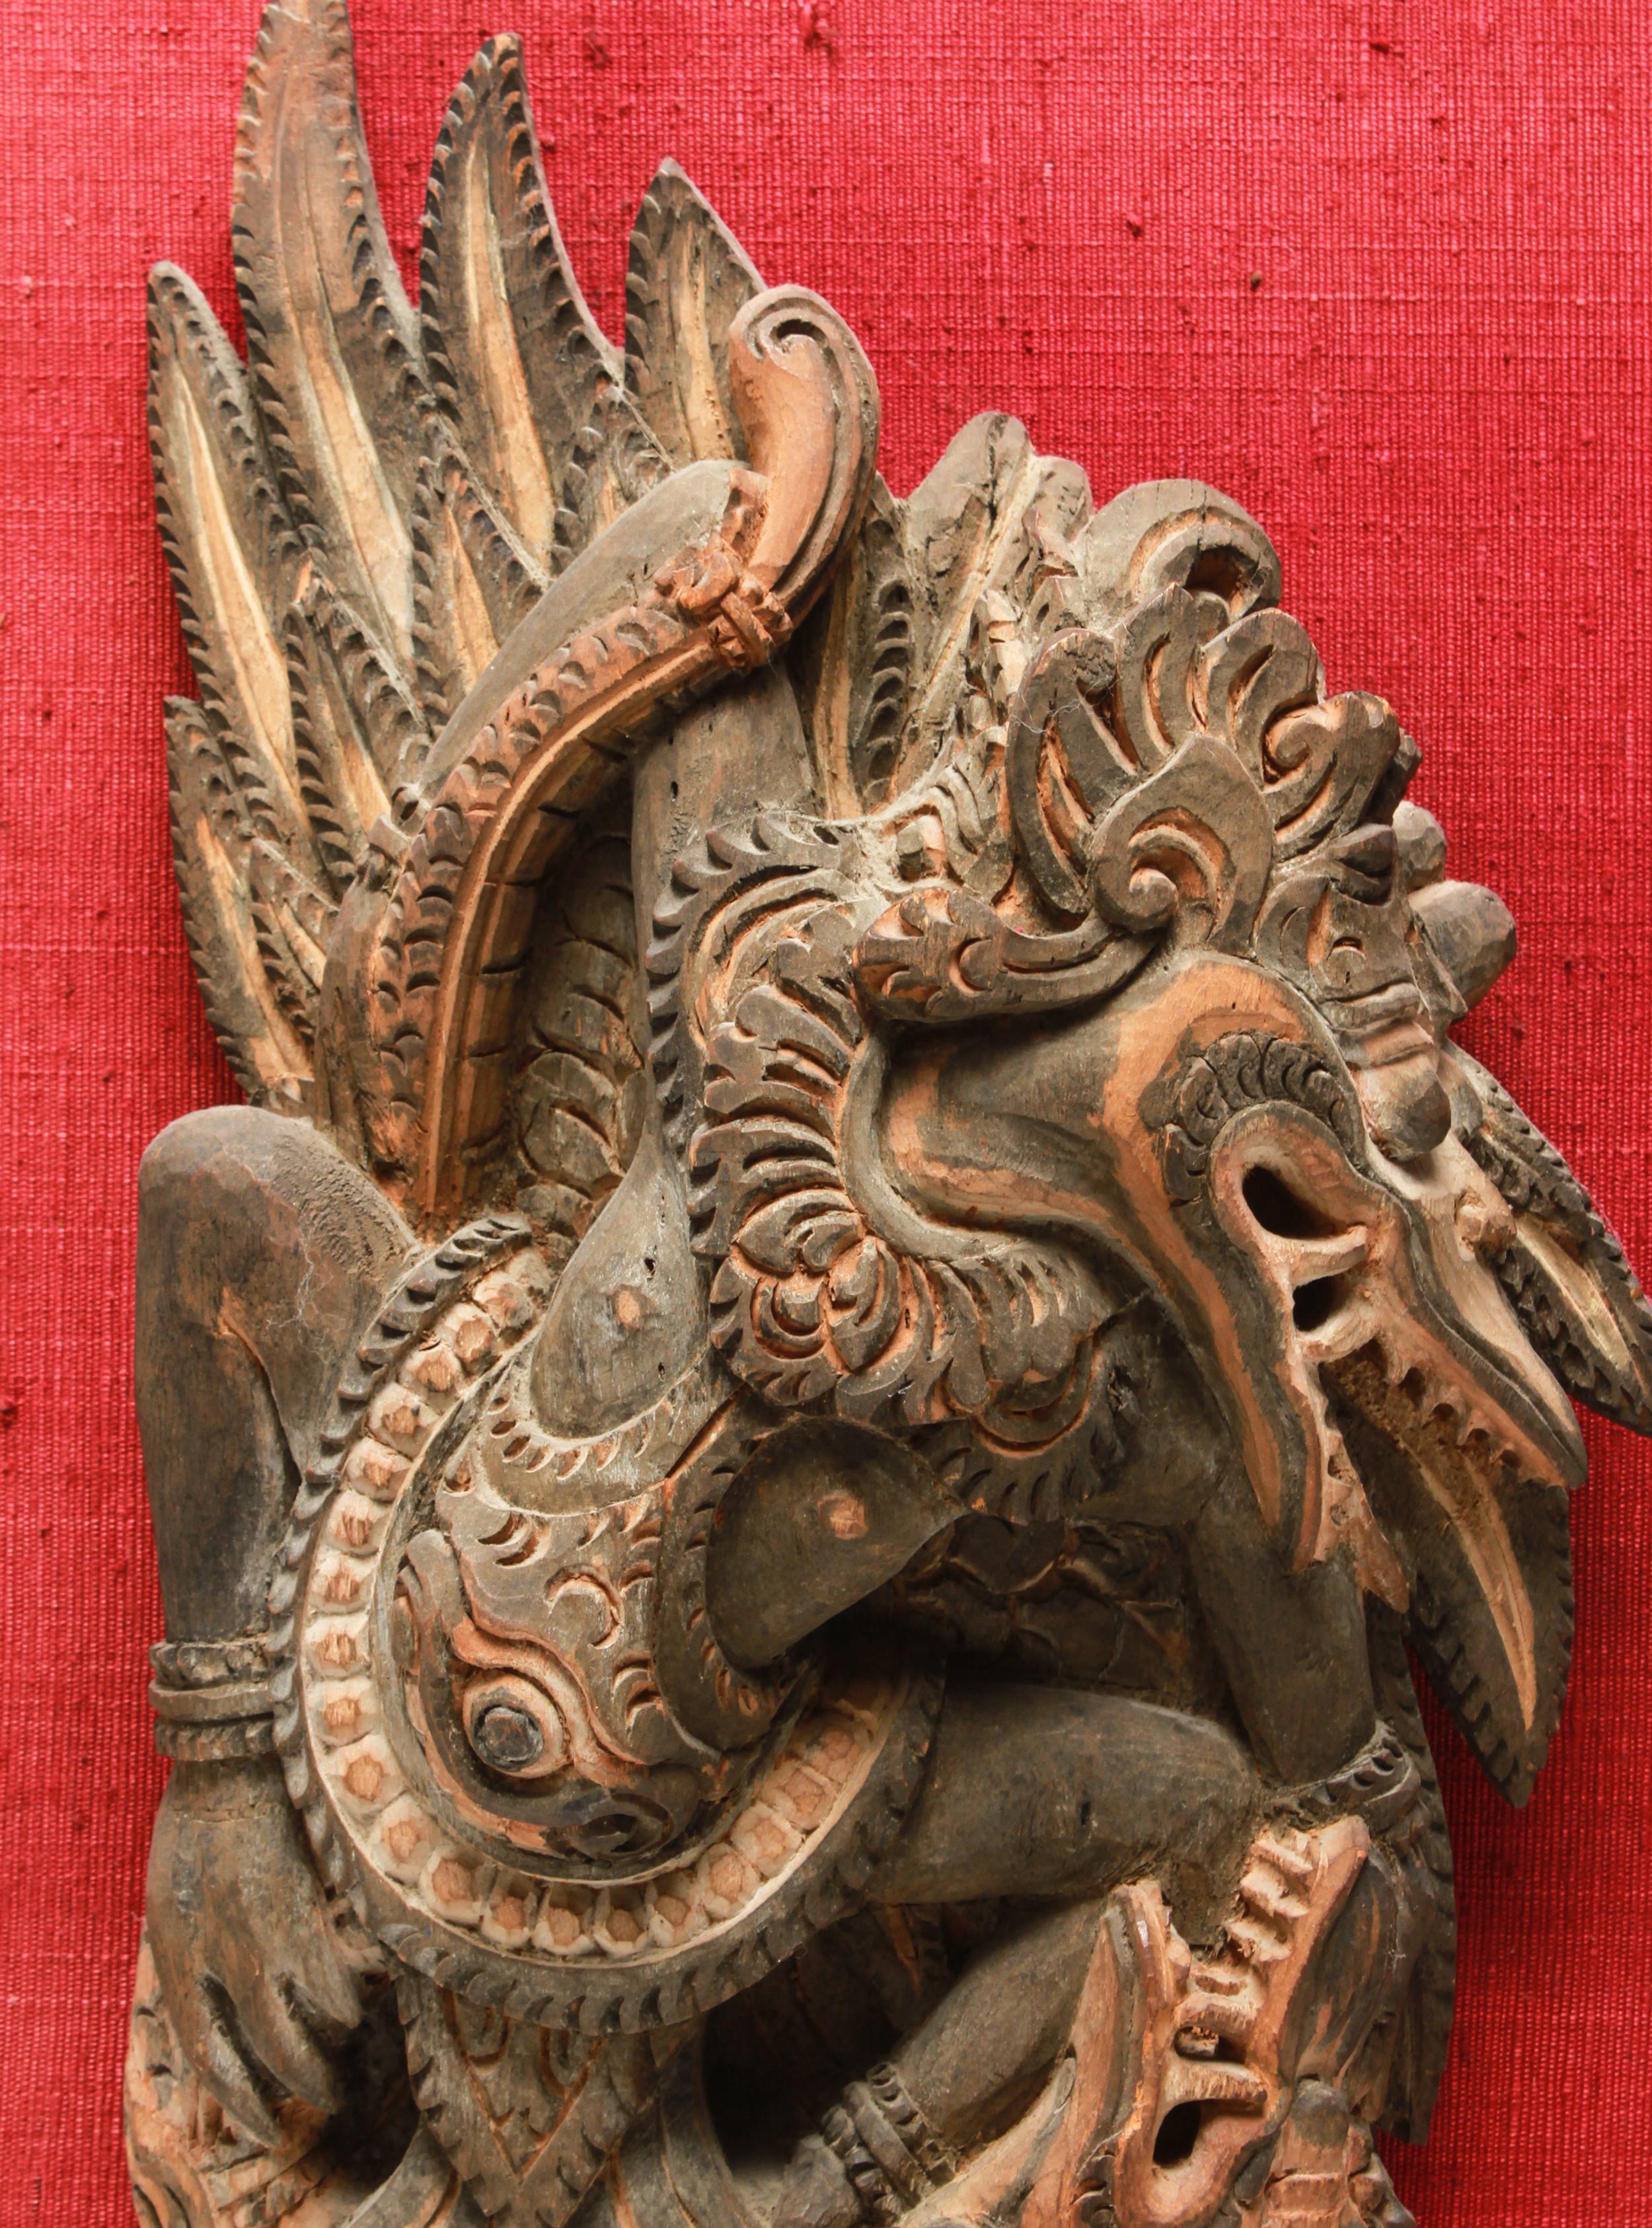 Indonesian Balinese wood hand carved Garuda bird sculpture, mounted as a wall hanging. The sculpture itself is 14.75